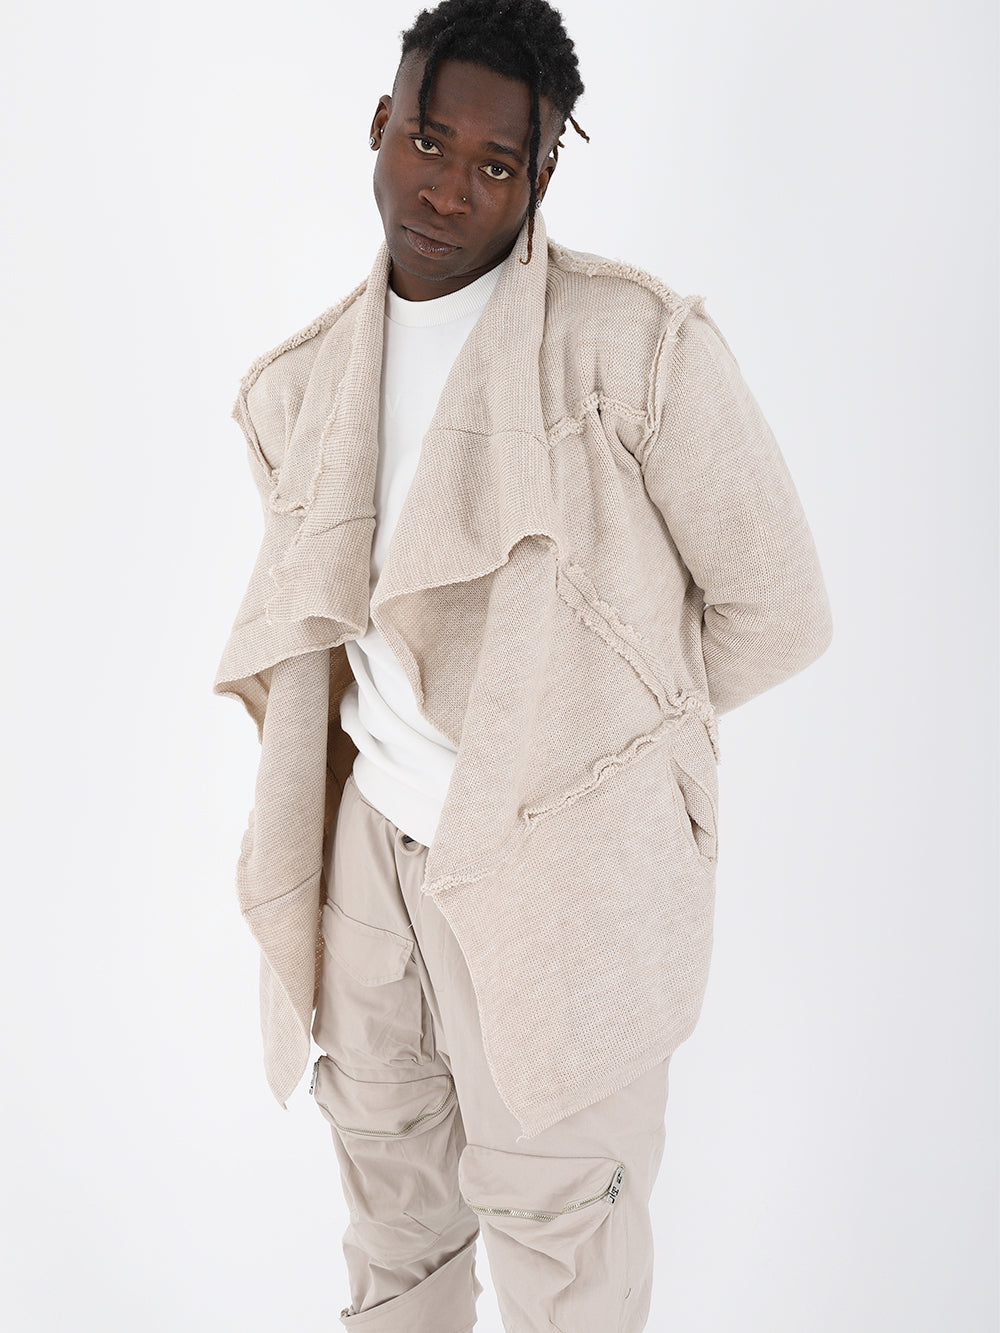 A black man wearing an ASYMMETRIC SHORT CARDIGAN // IVORY jacket and pants with a true to size fit.